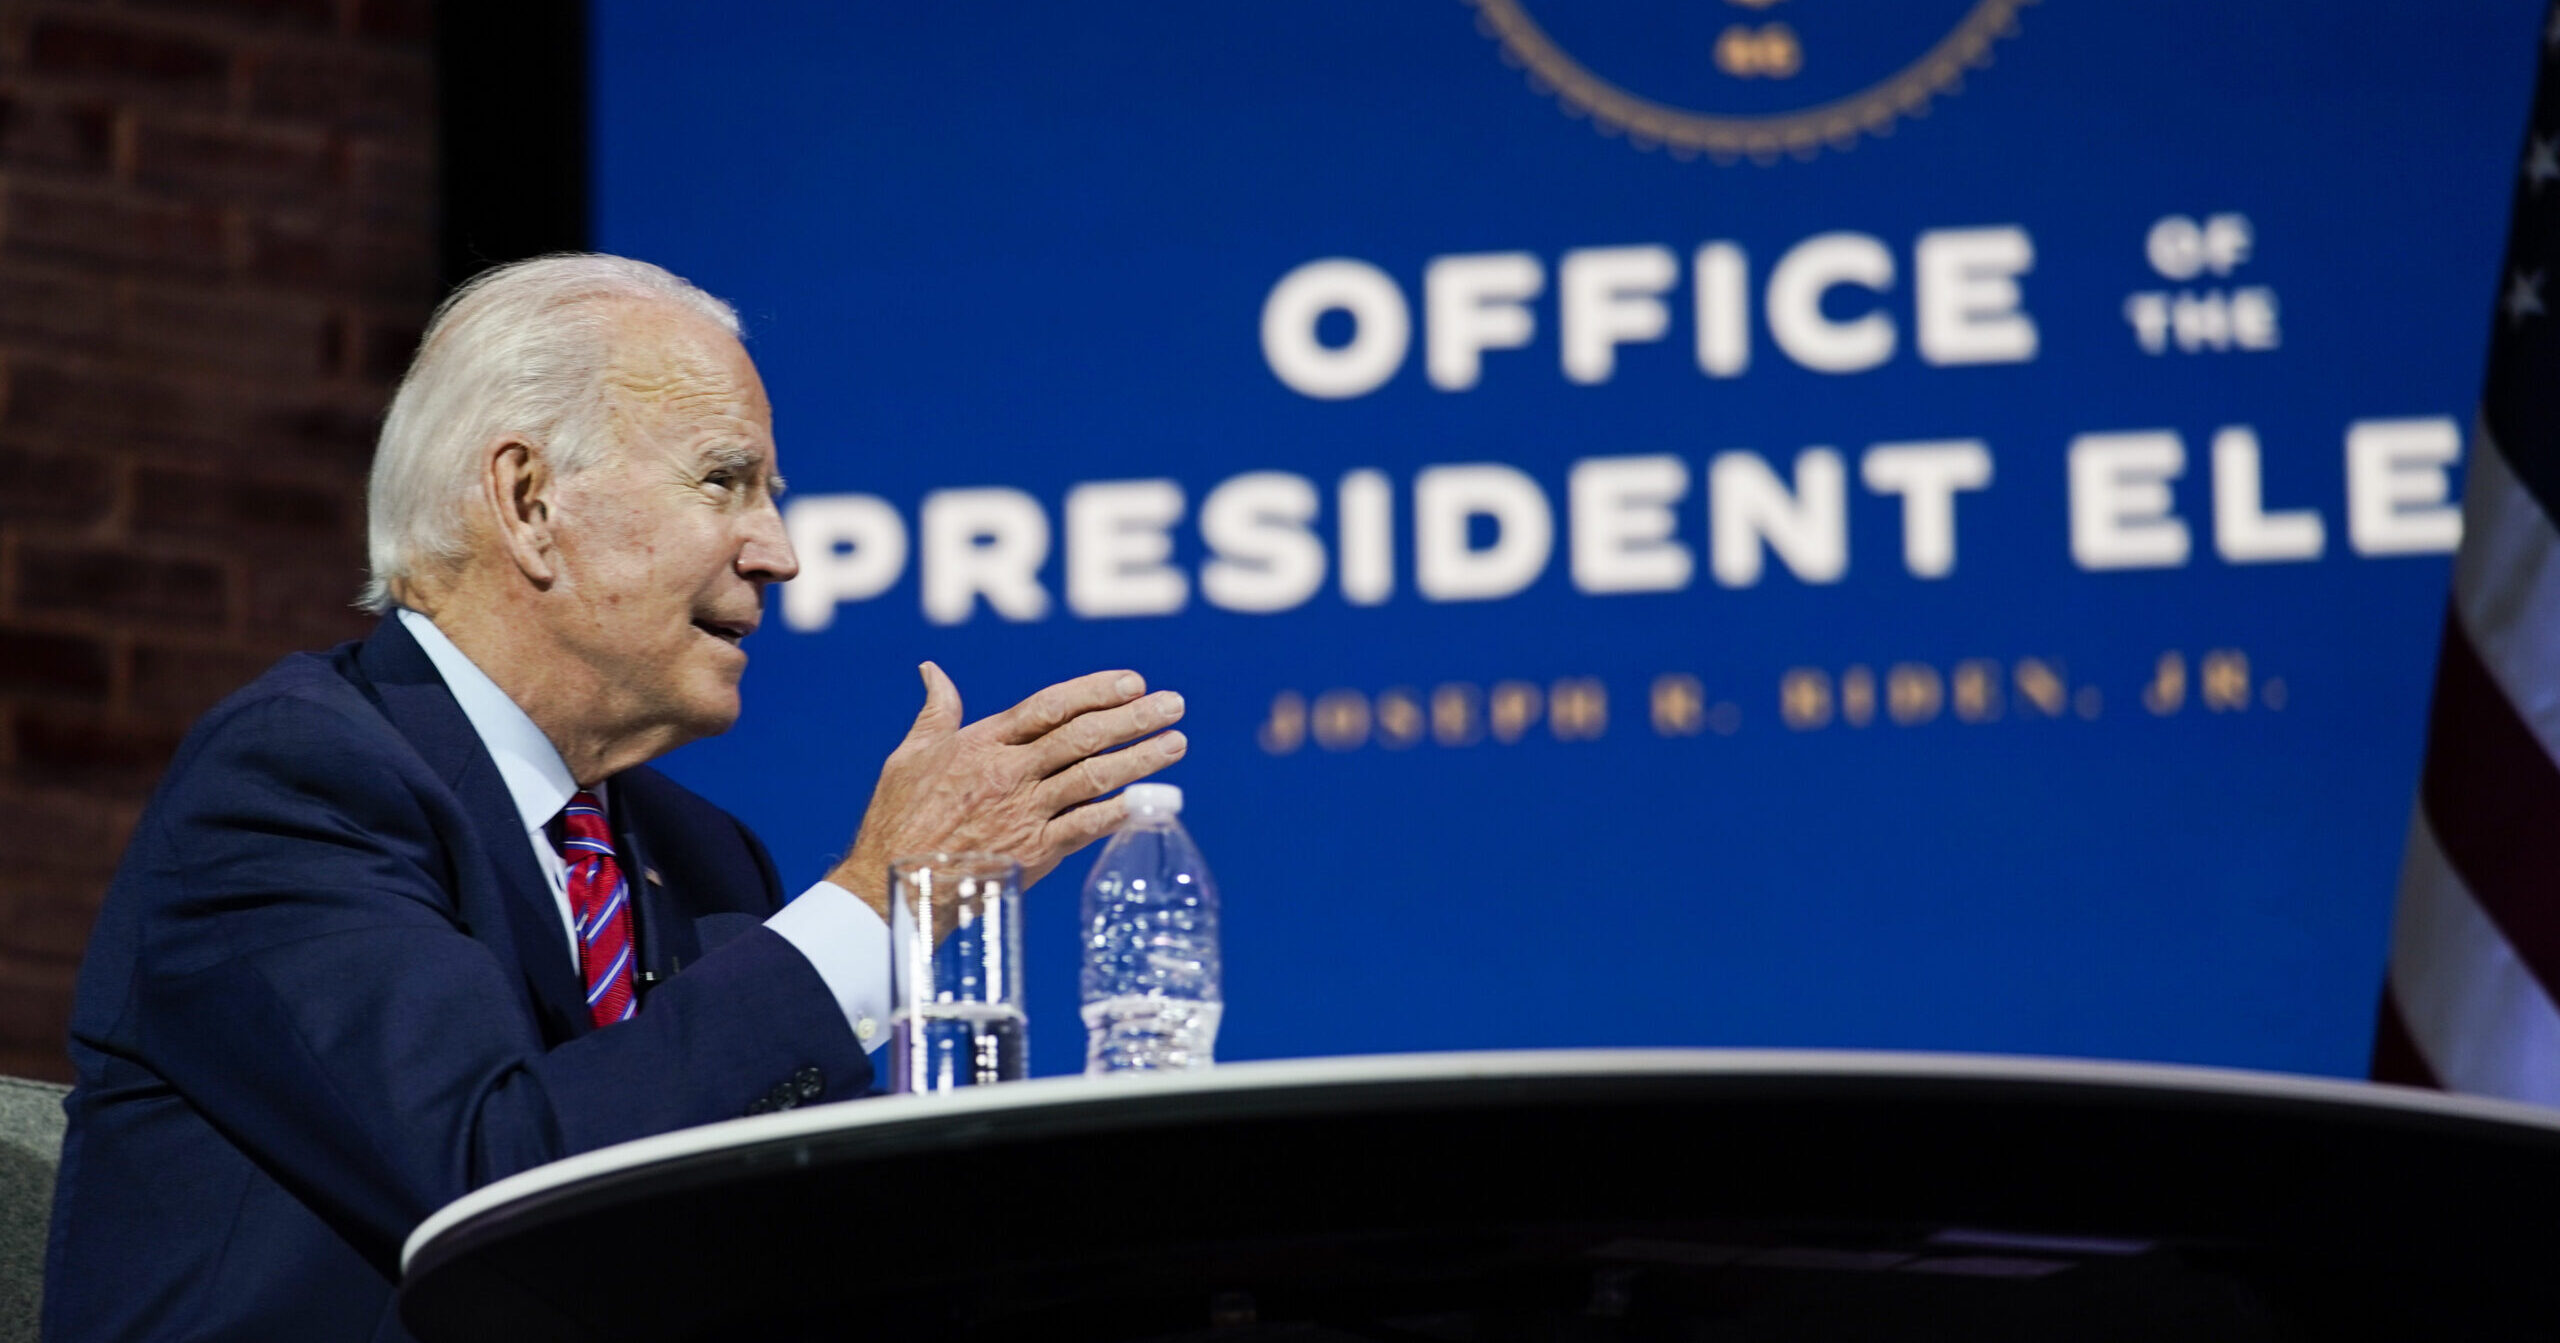 President-elect Joe Biden speaks during a meeting at The Queen theater Monday, Nov. 23, 2020, in Wilmington, Del. (AP Photo/Carolyn Kaster)